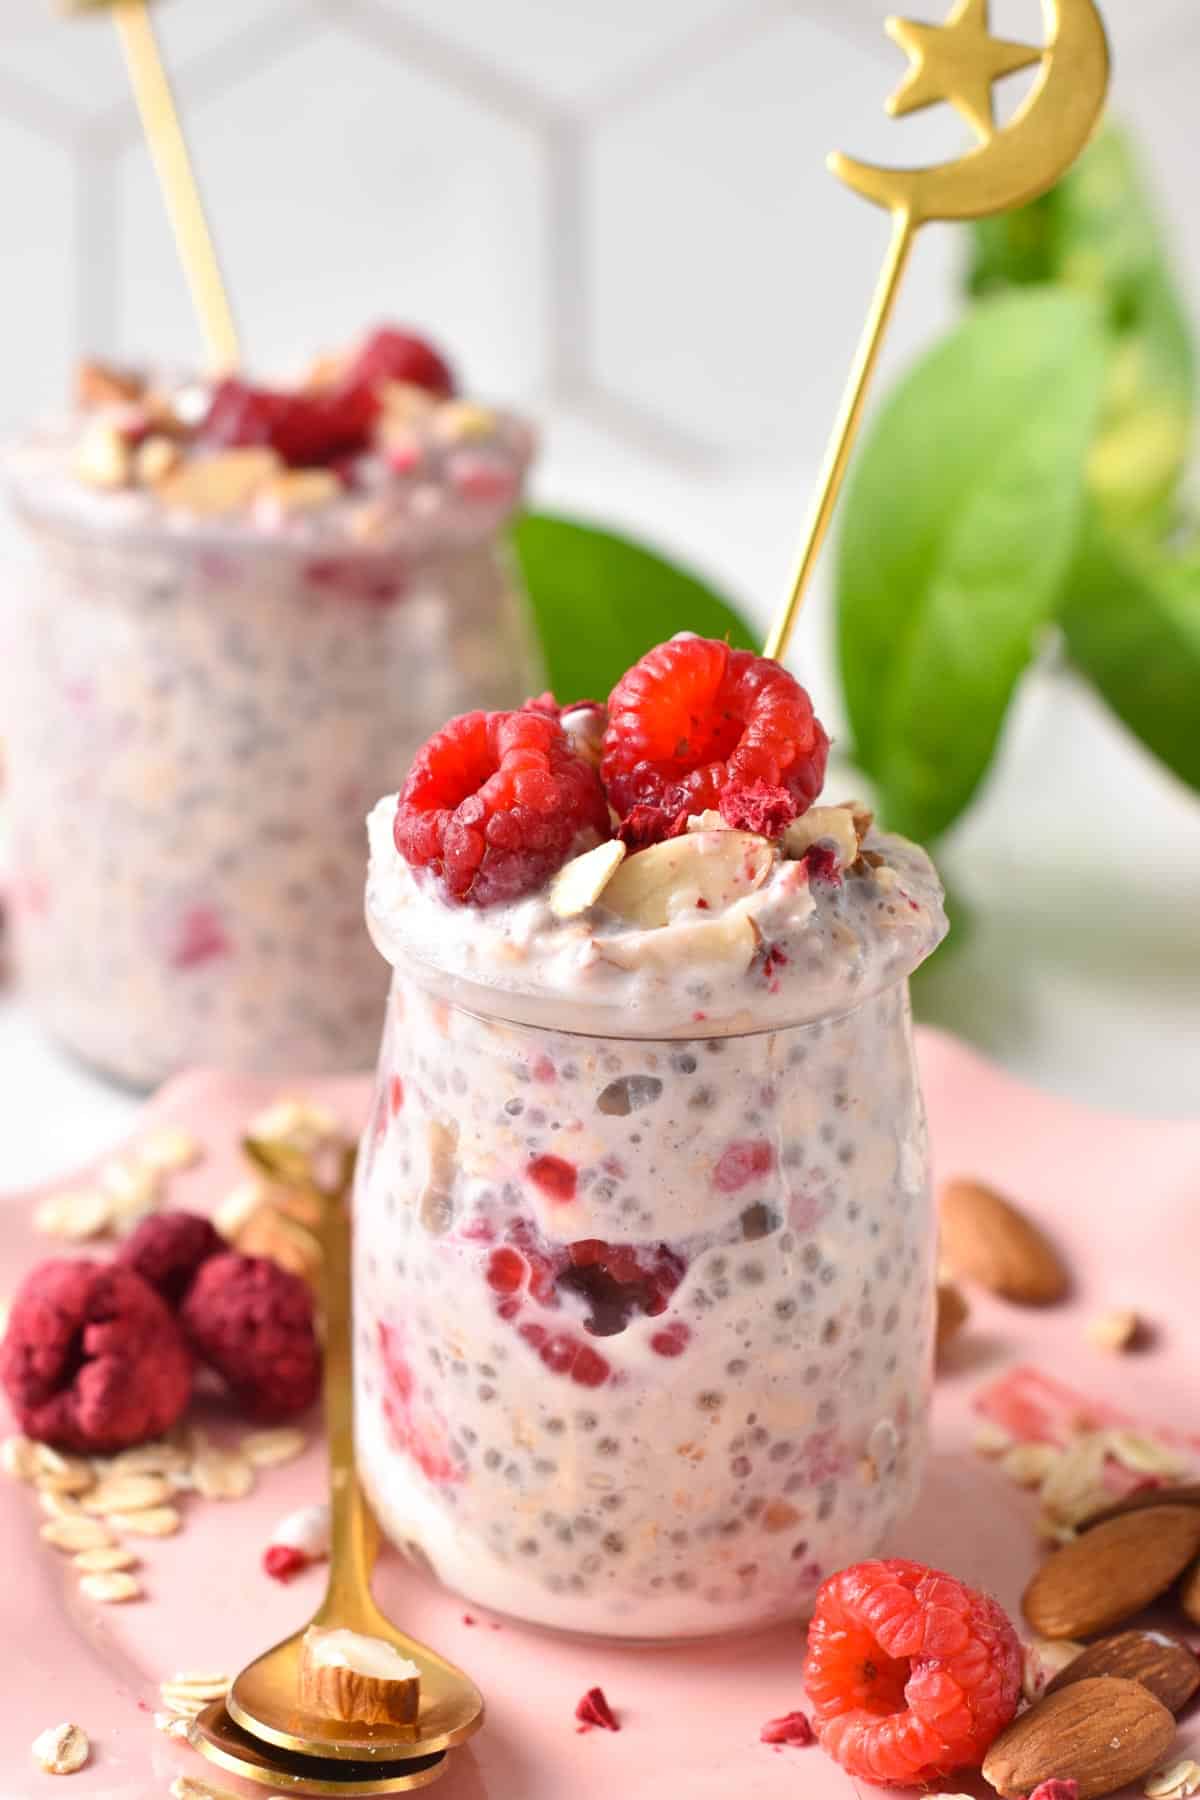 These Raspberry Overnight Oats are the most refreshing breakfast oatmeal jars for summer. Packed with nutrient-dense chia seeds, oats, and fresh raspberries, these will keep you full and happy in the morning.